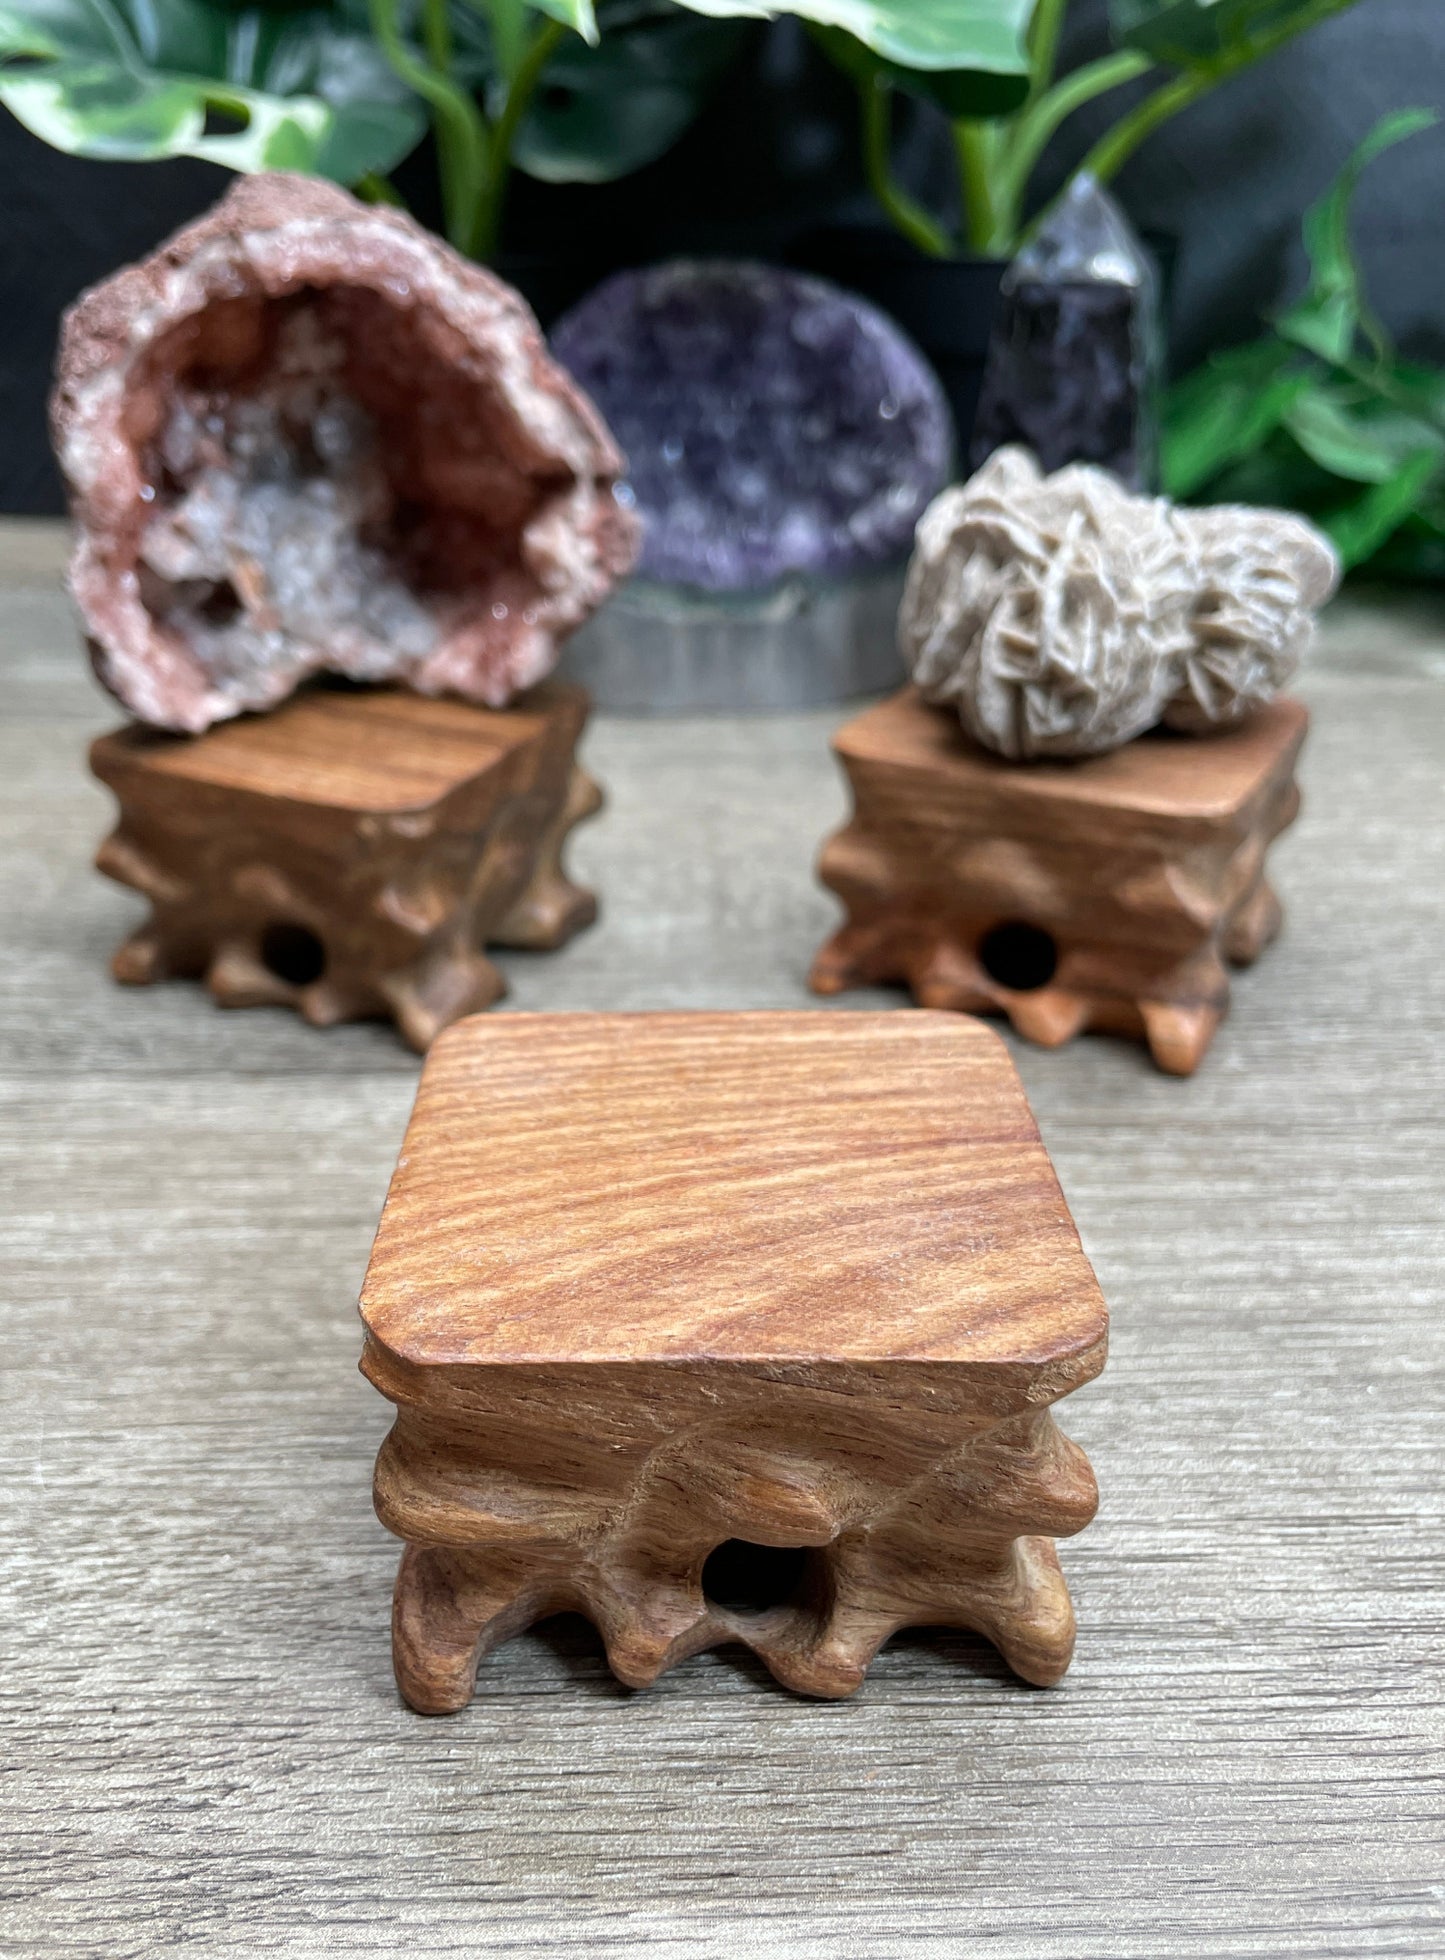 Pictured are various wood crystal specimen stands.